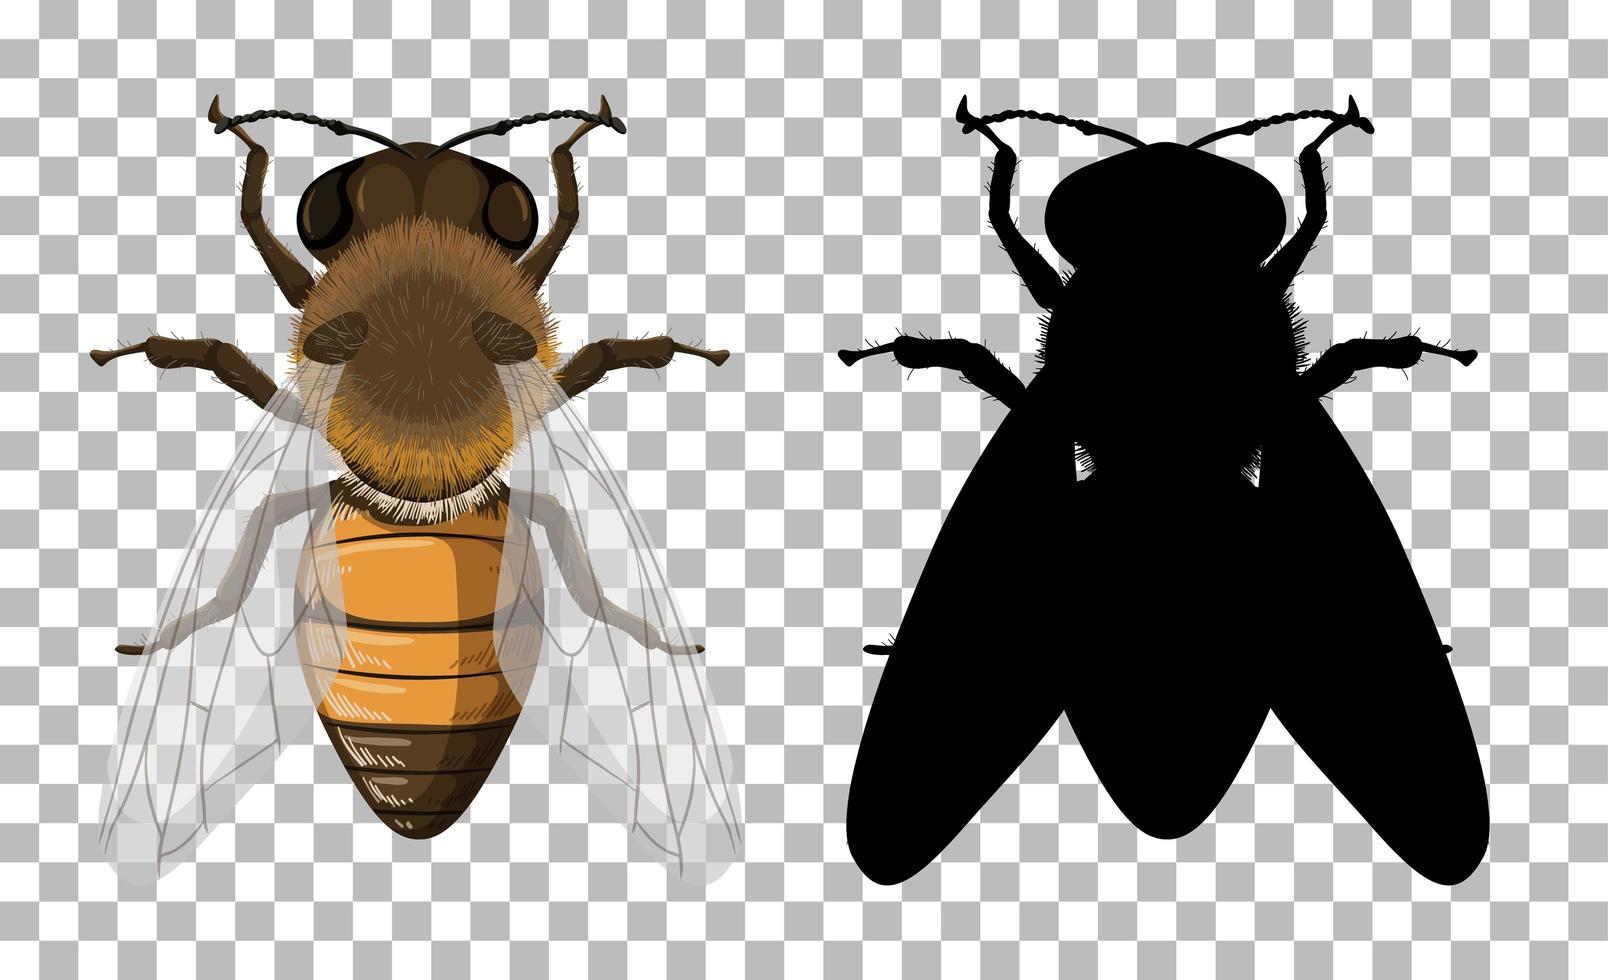 Honey bee with its silhouette on transparent background vector